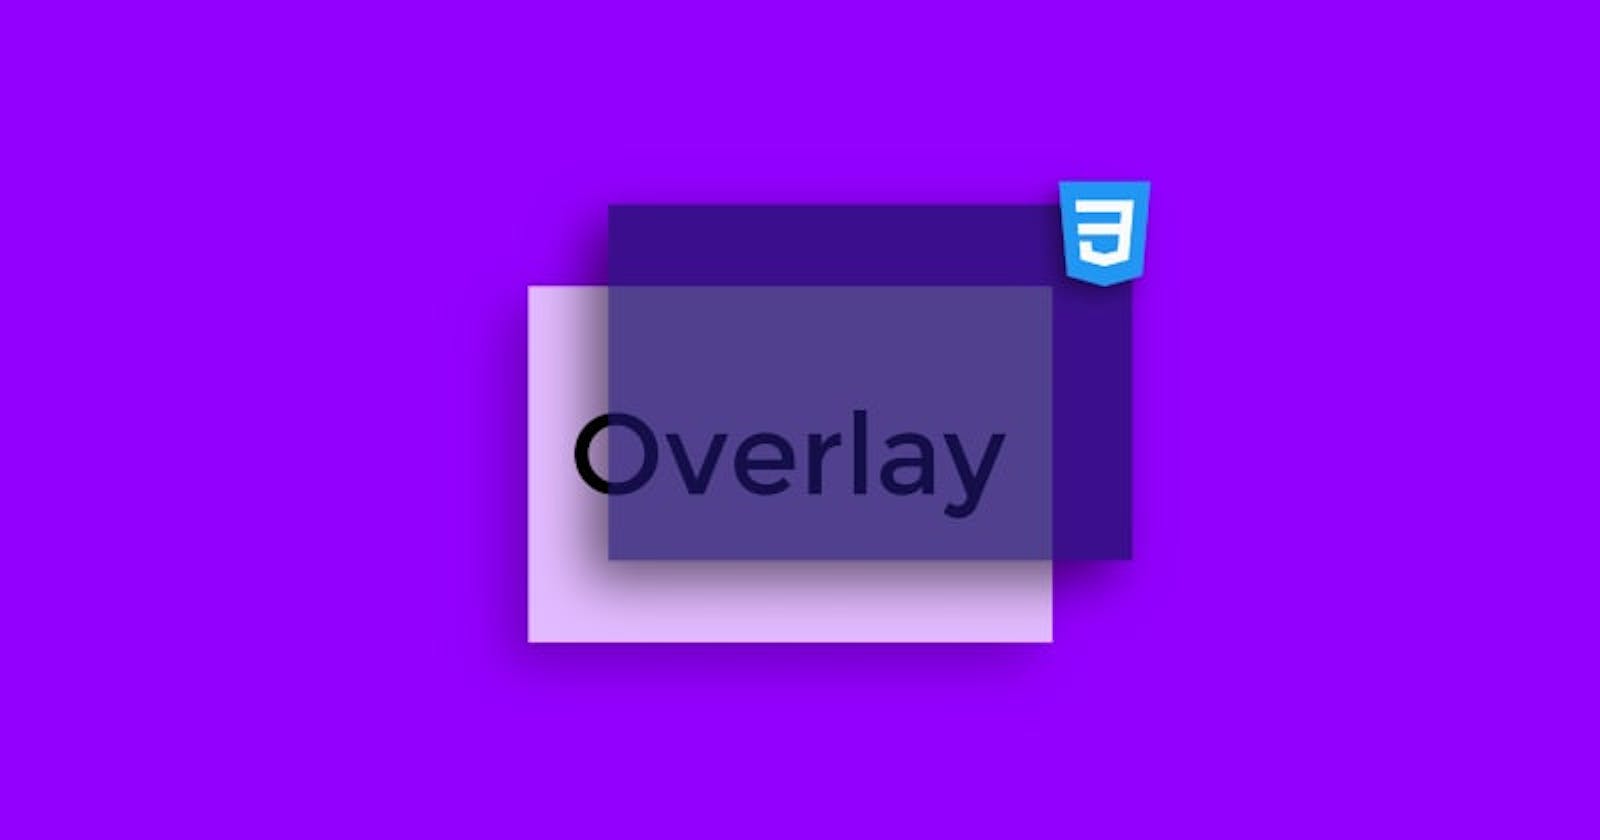 How to Create an Overlay Effect with CSS